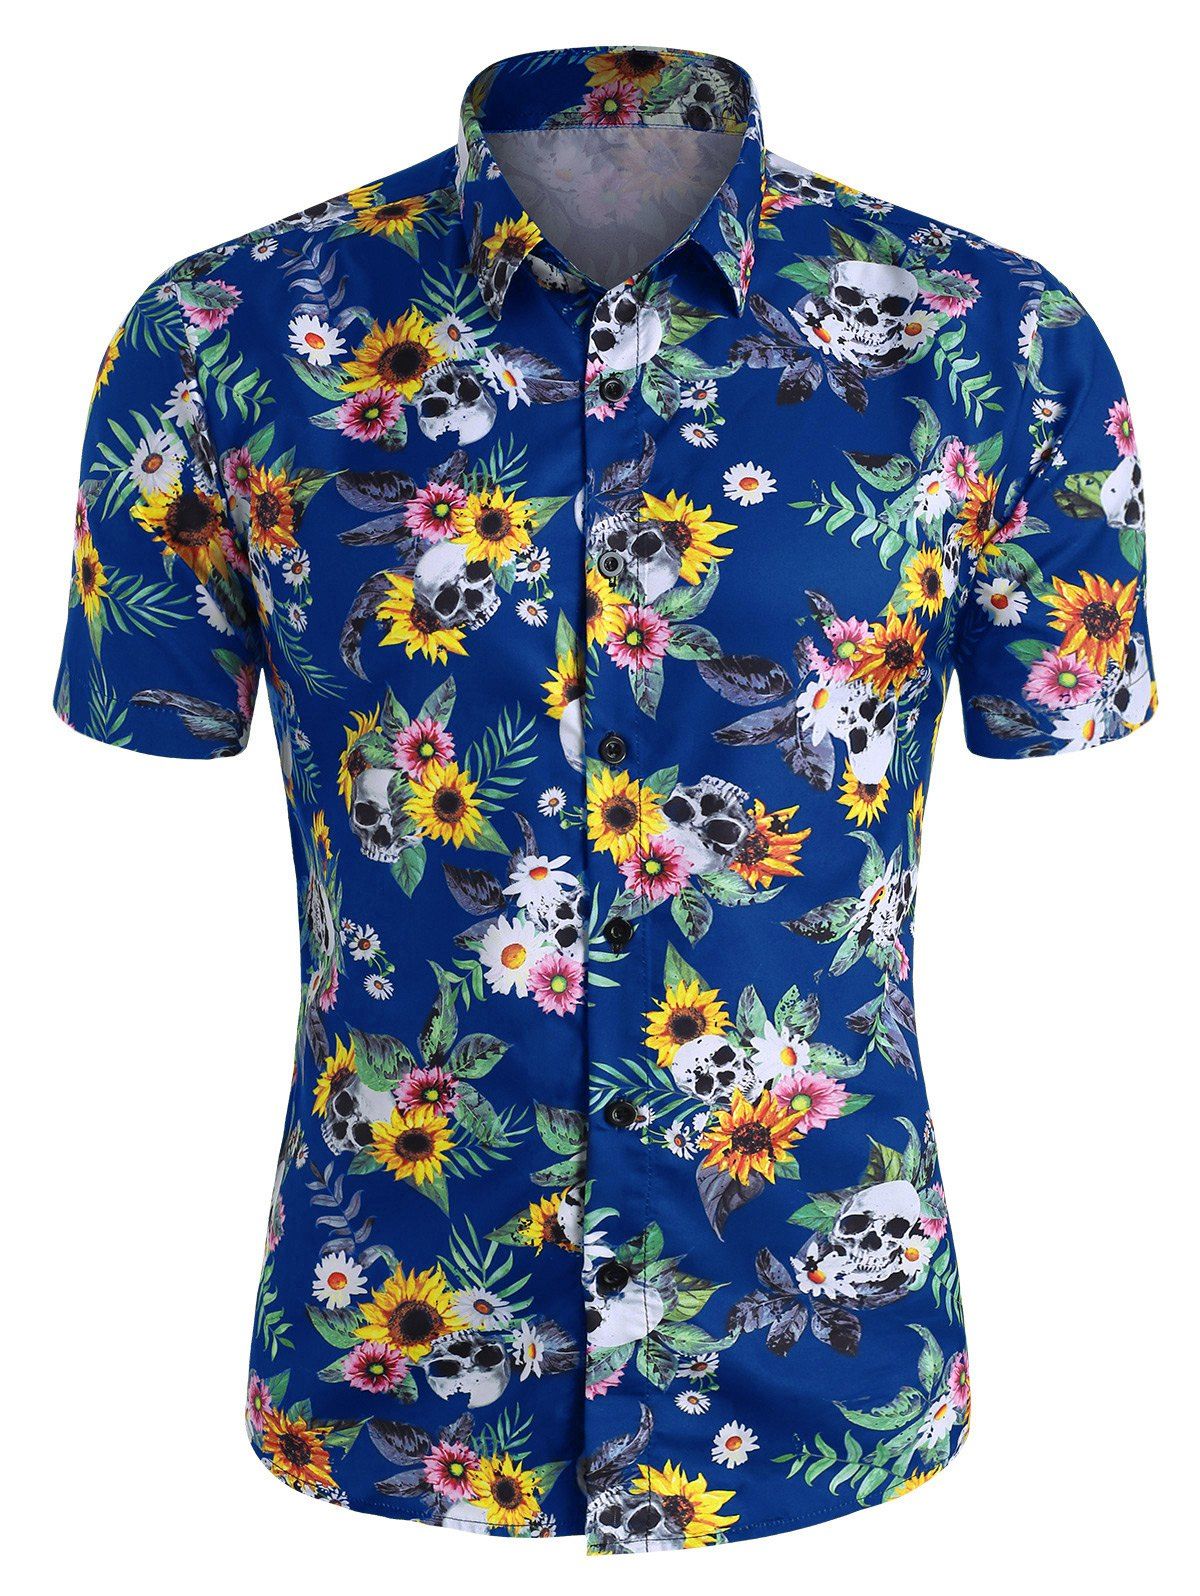 [36% OFF] 2020 Skull Ditsy Floral Button Up Casual Shirt In BLUE ...